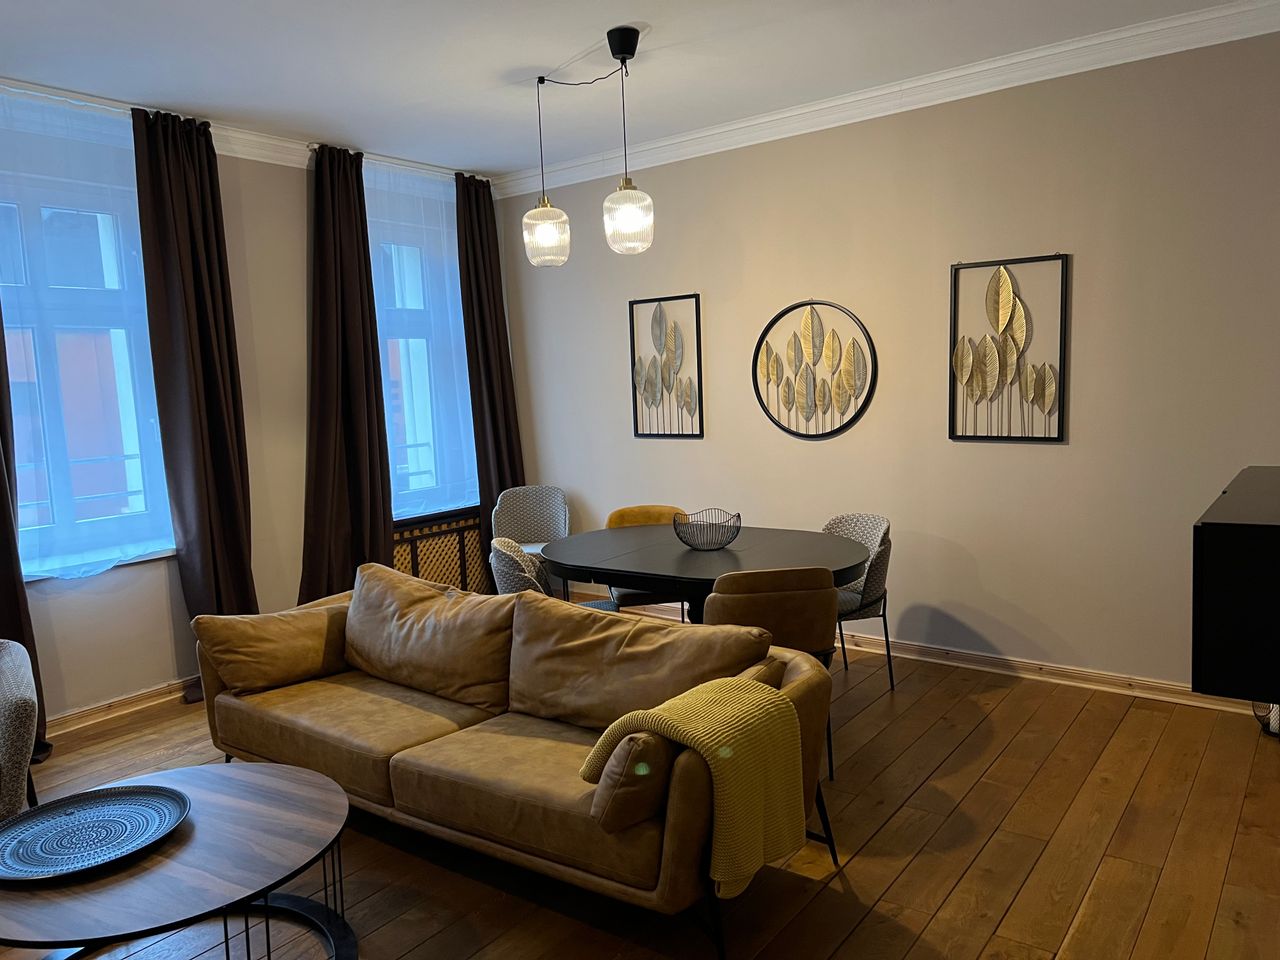 Great and cozy maisonette apartment